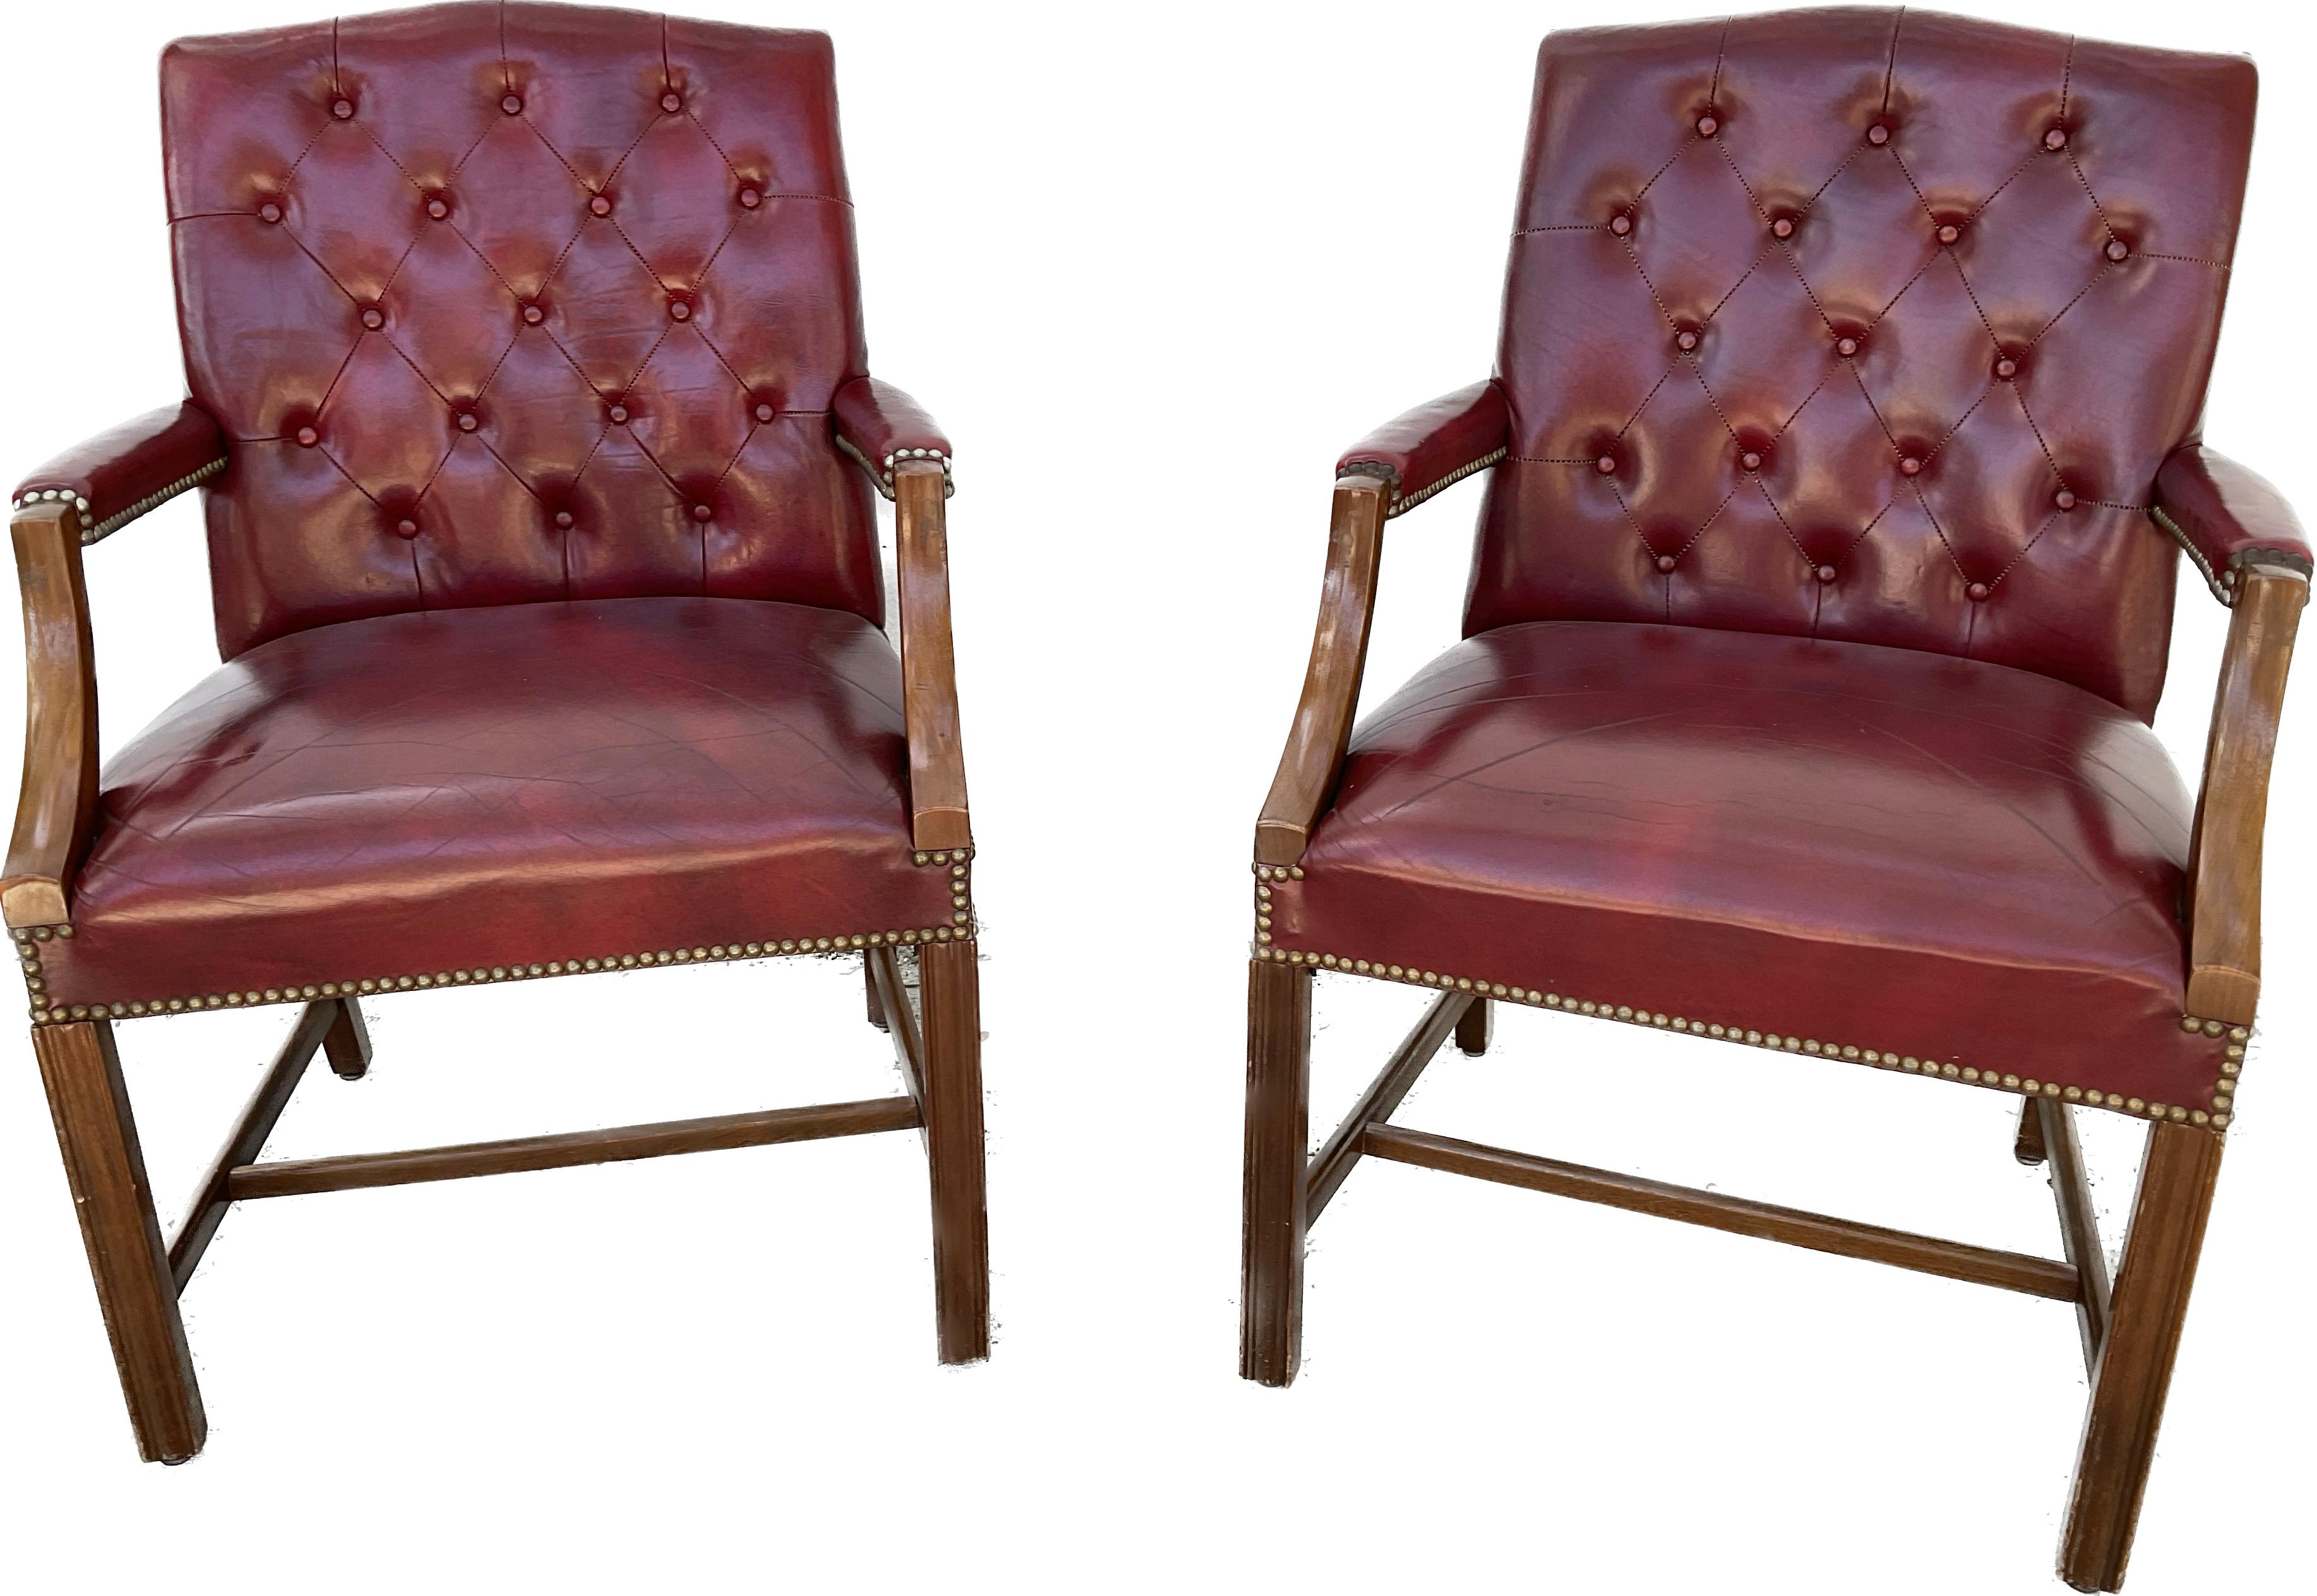 Pair of Tufted Leather Chesterfield Armchairs For Sale 2